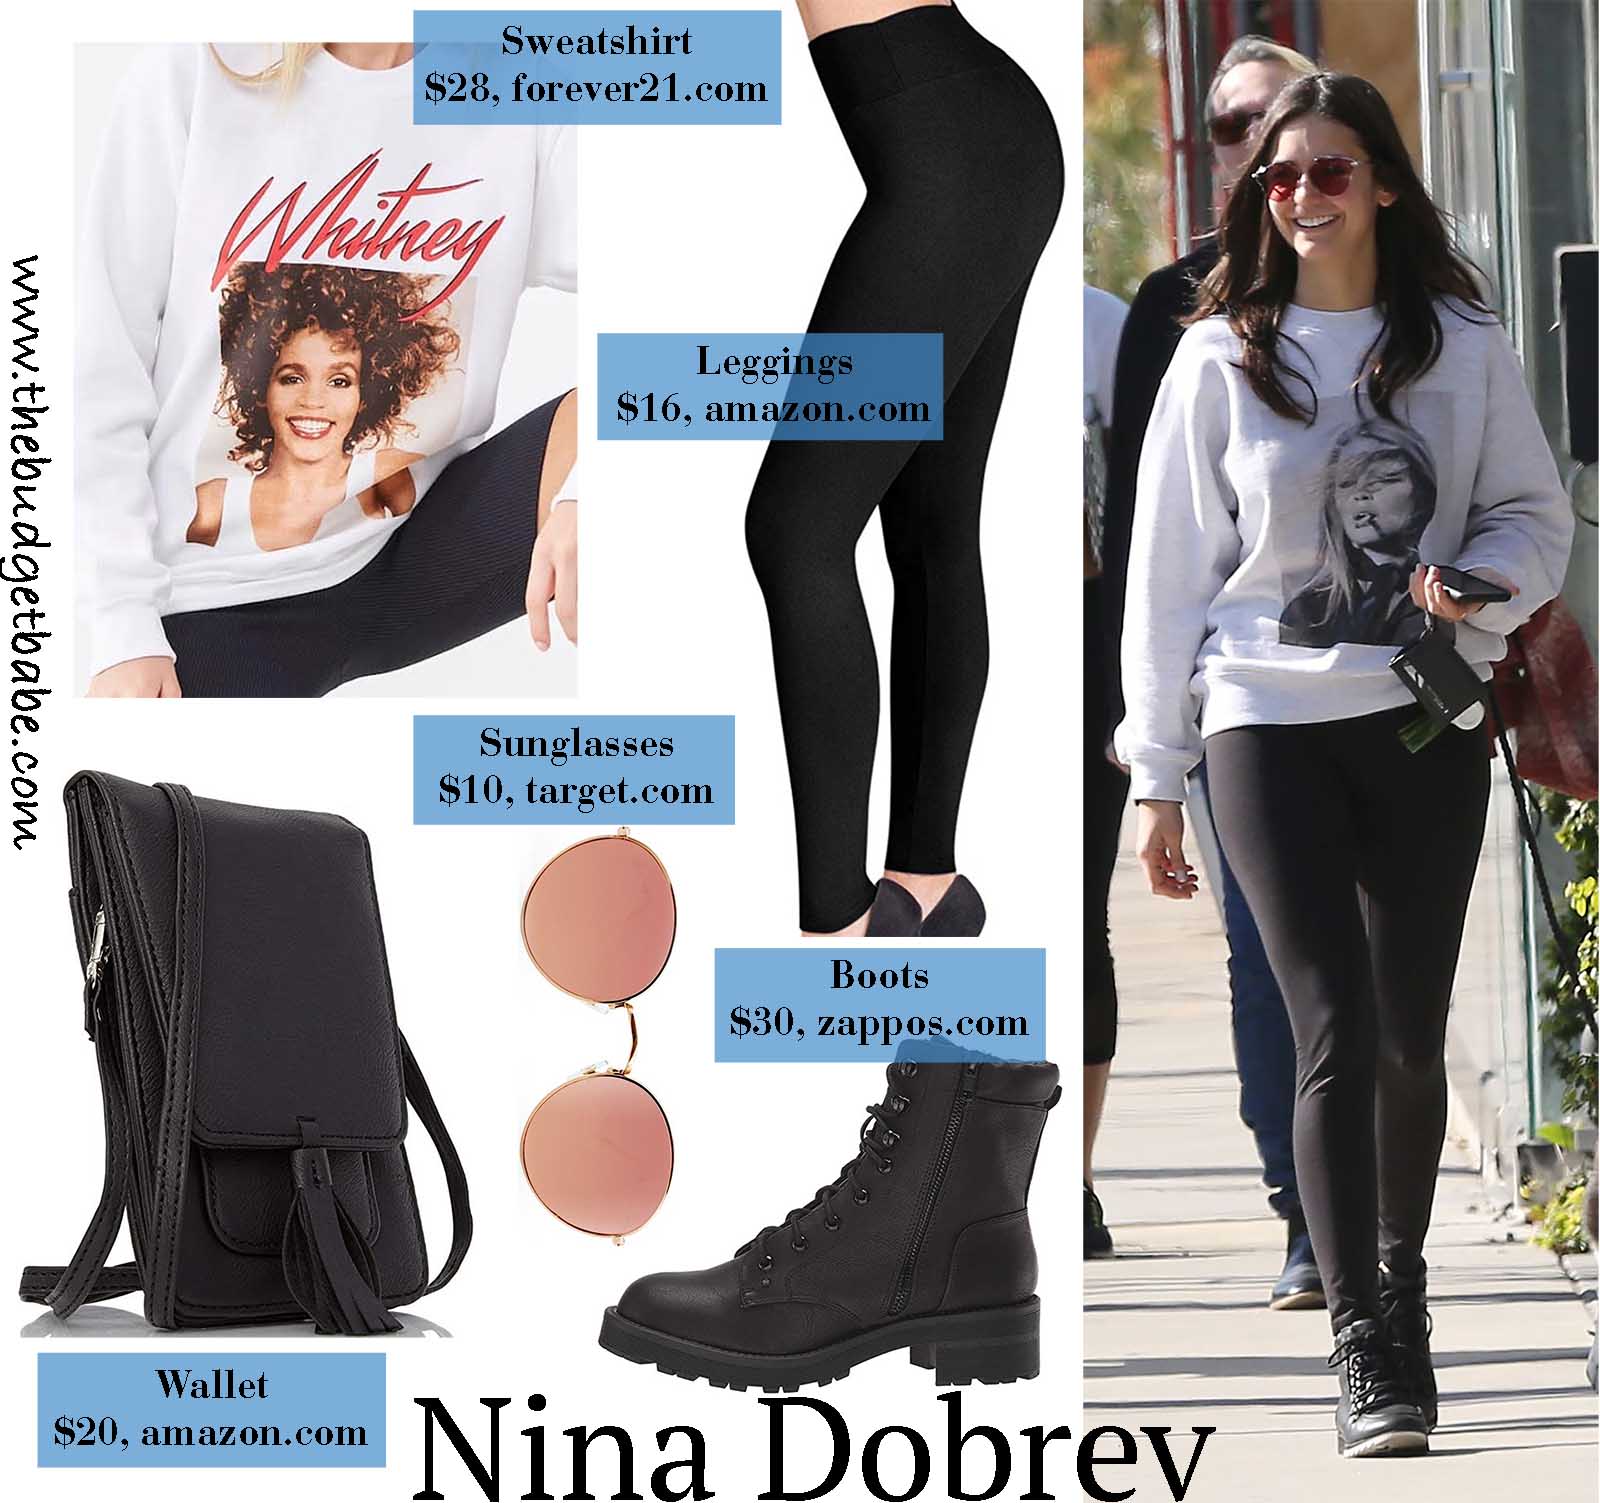 Nina Dobrev is cool girl perfection in a graphic sweatshirt!